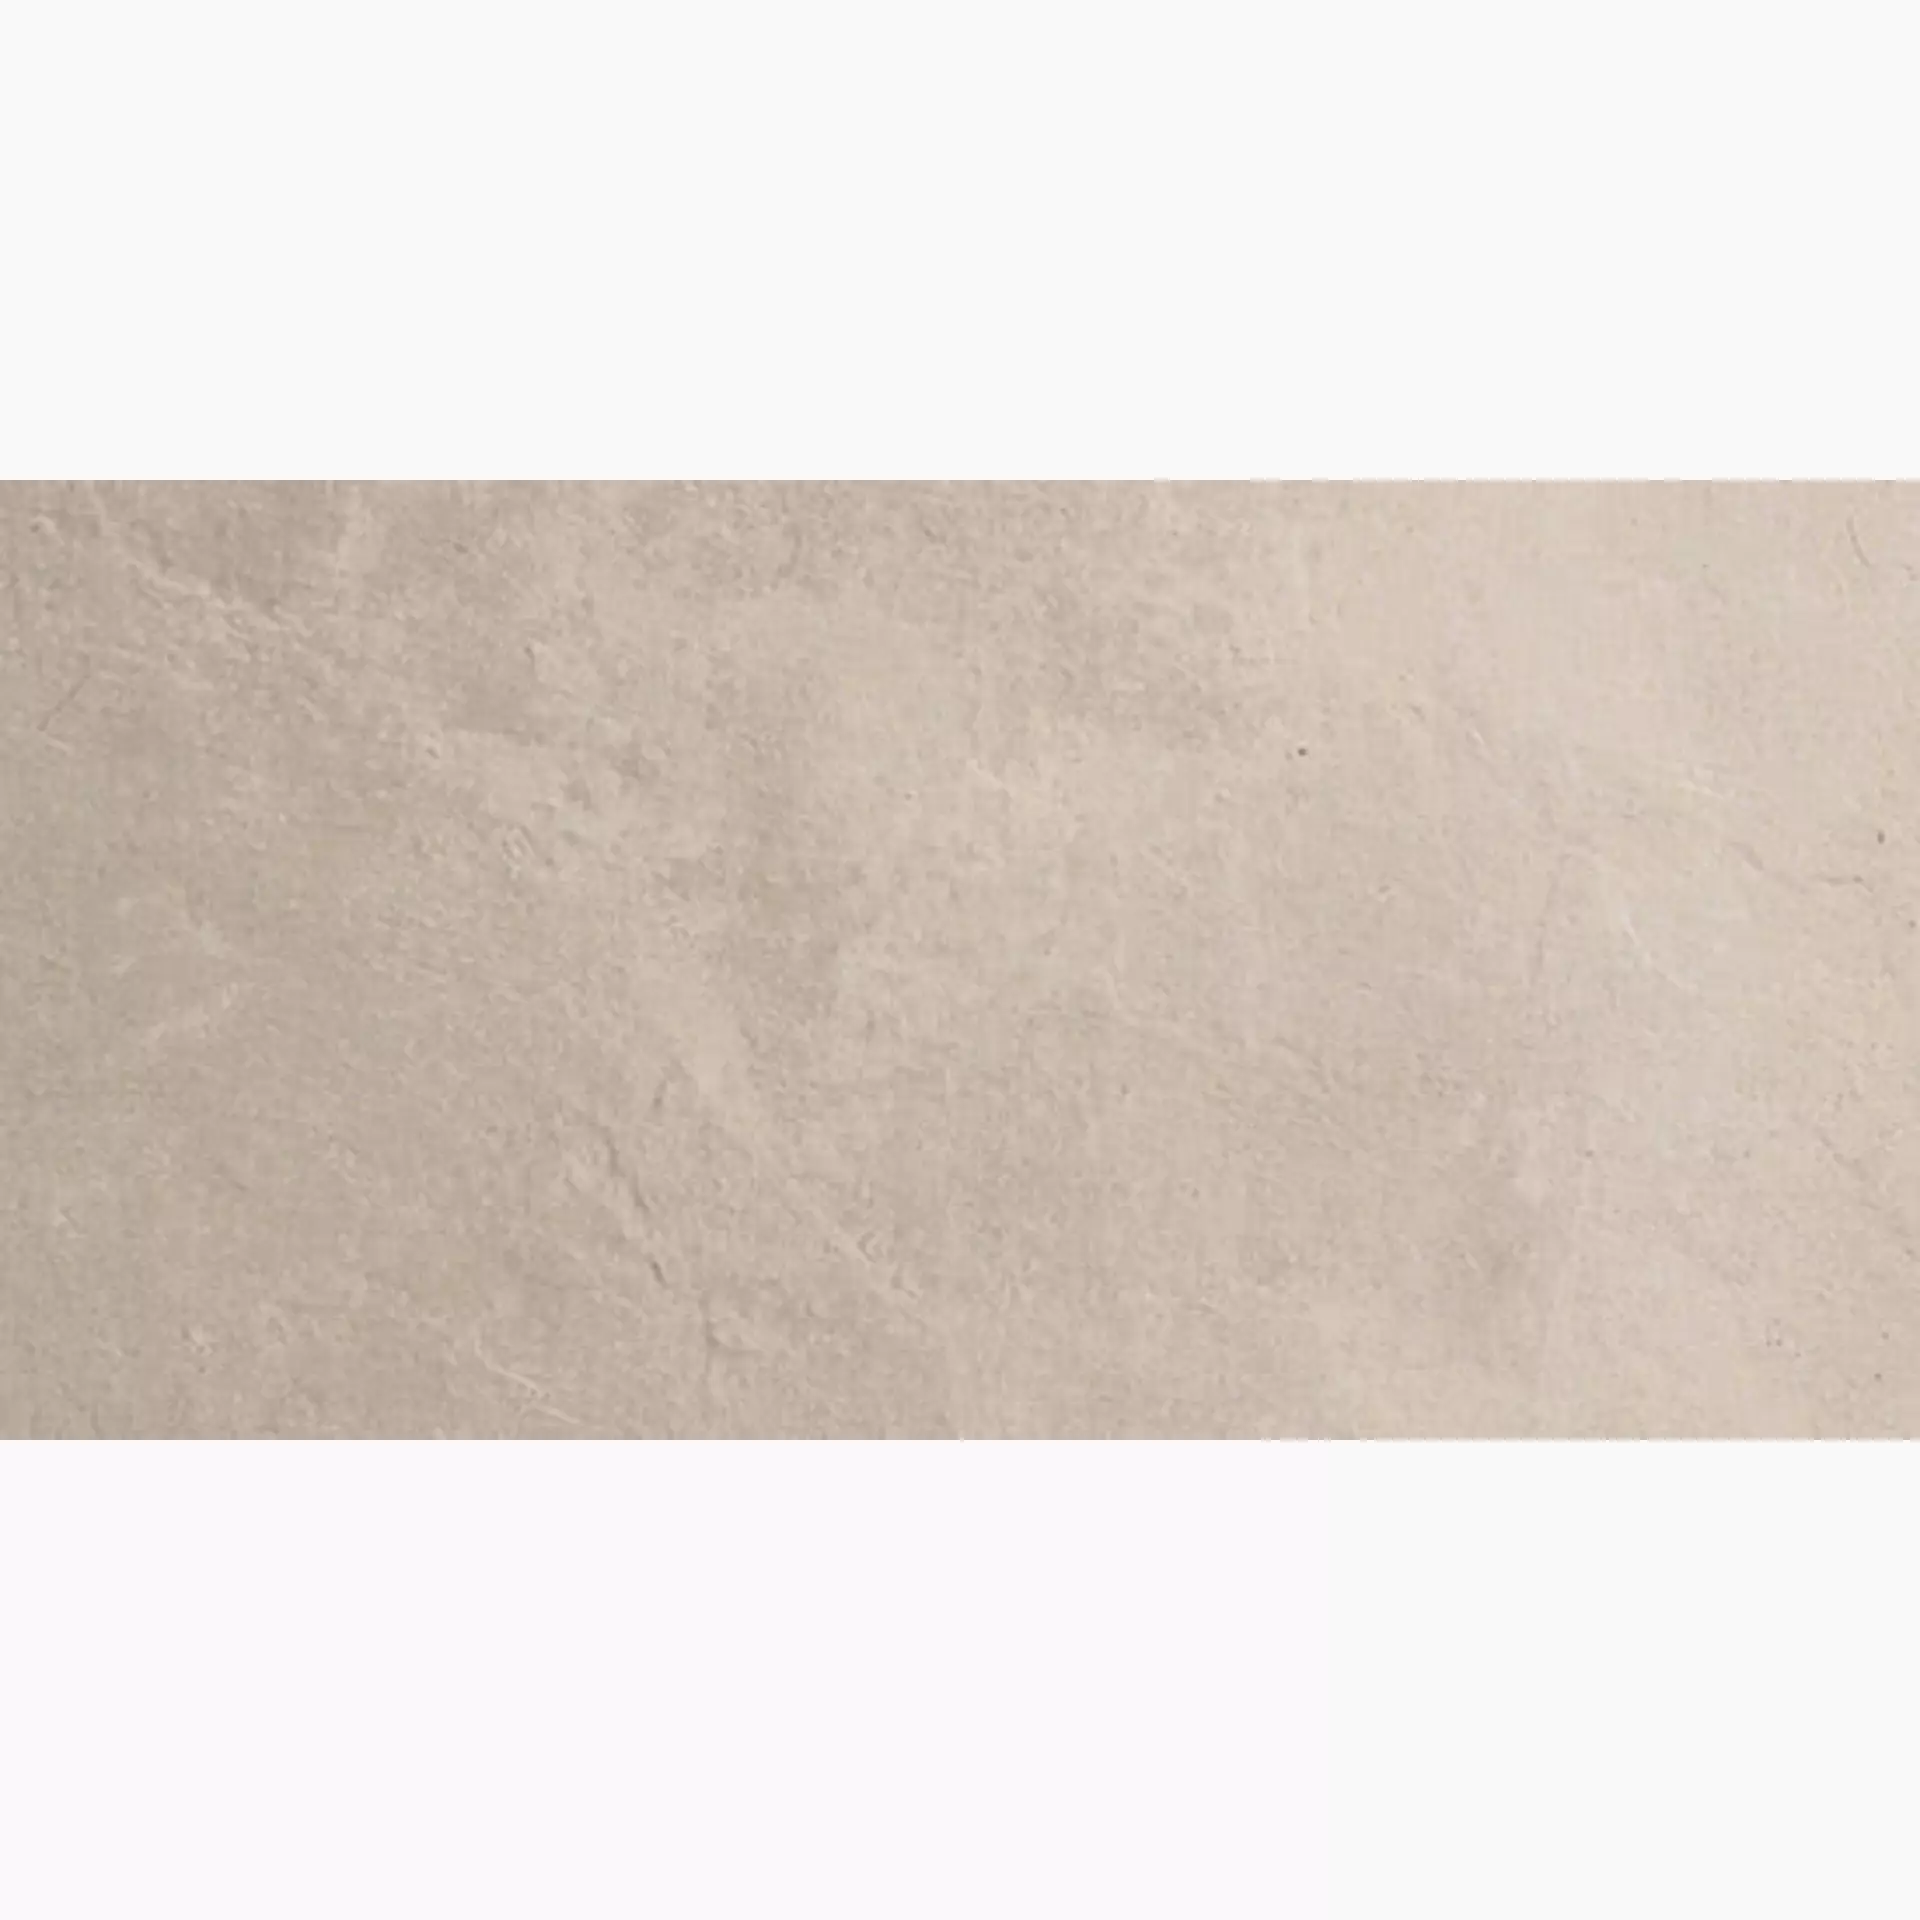 Coem Ardesia Mix Avorio Naturale Base AR361BR 30x60cm rectified 10mm